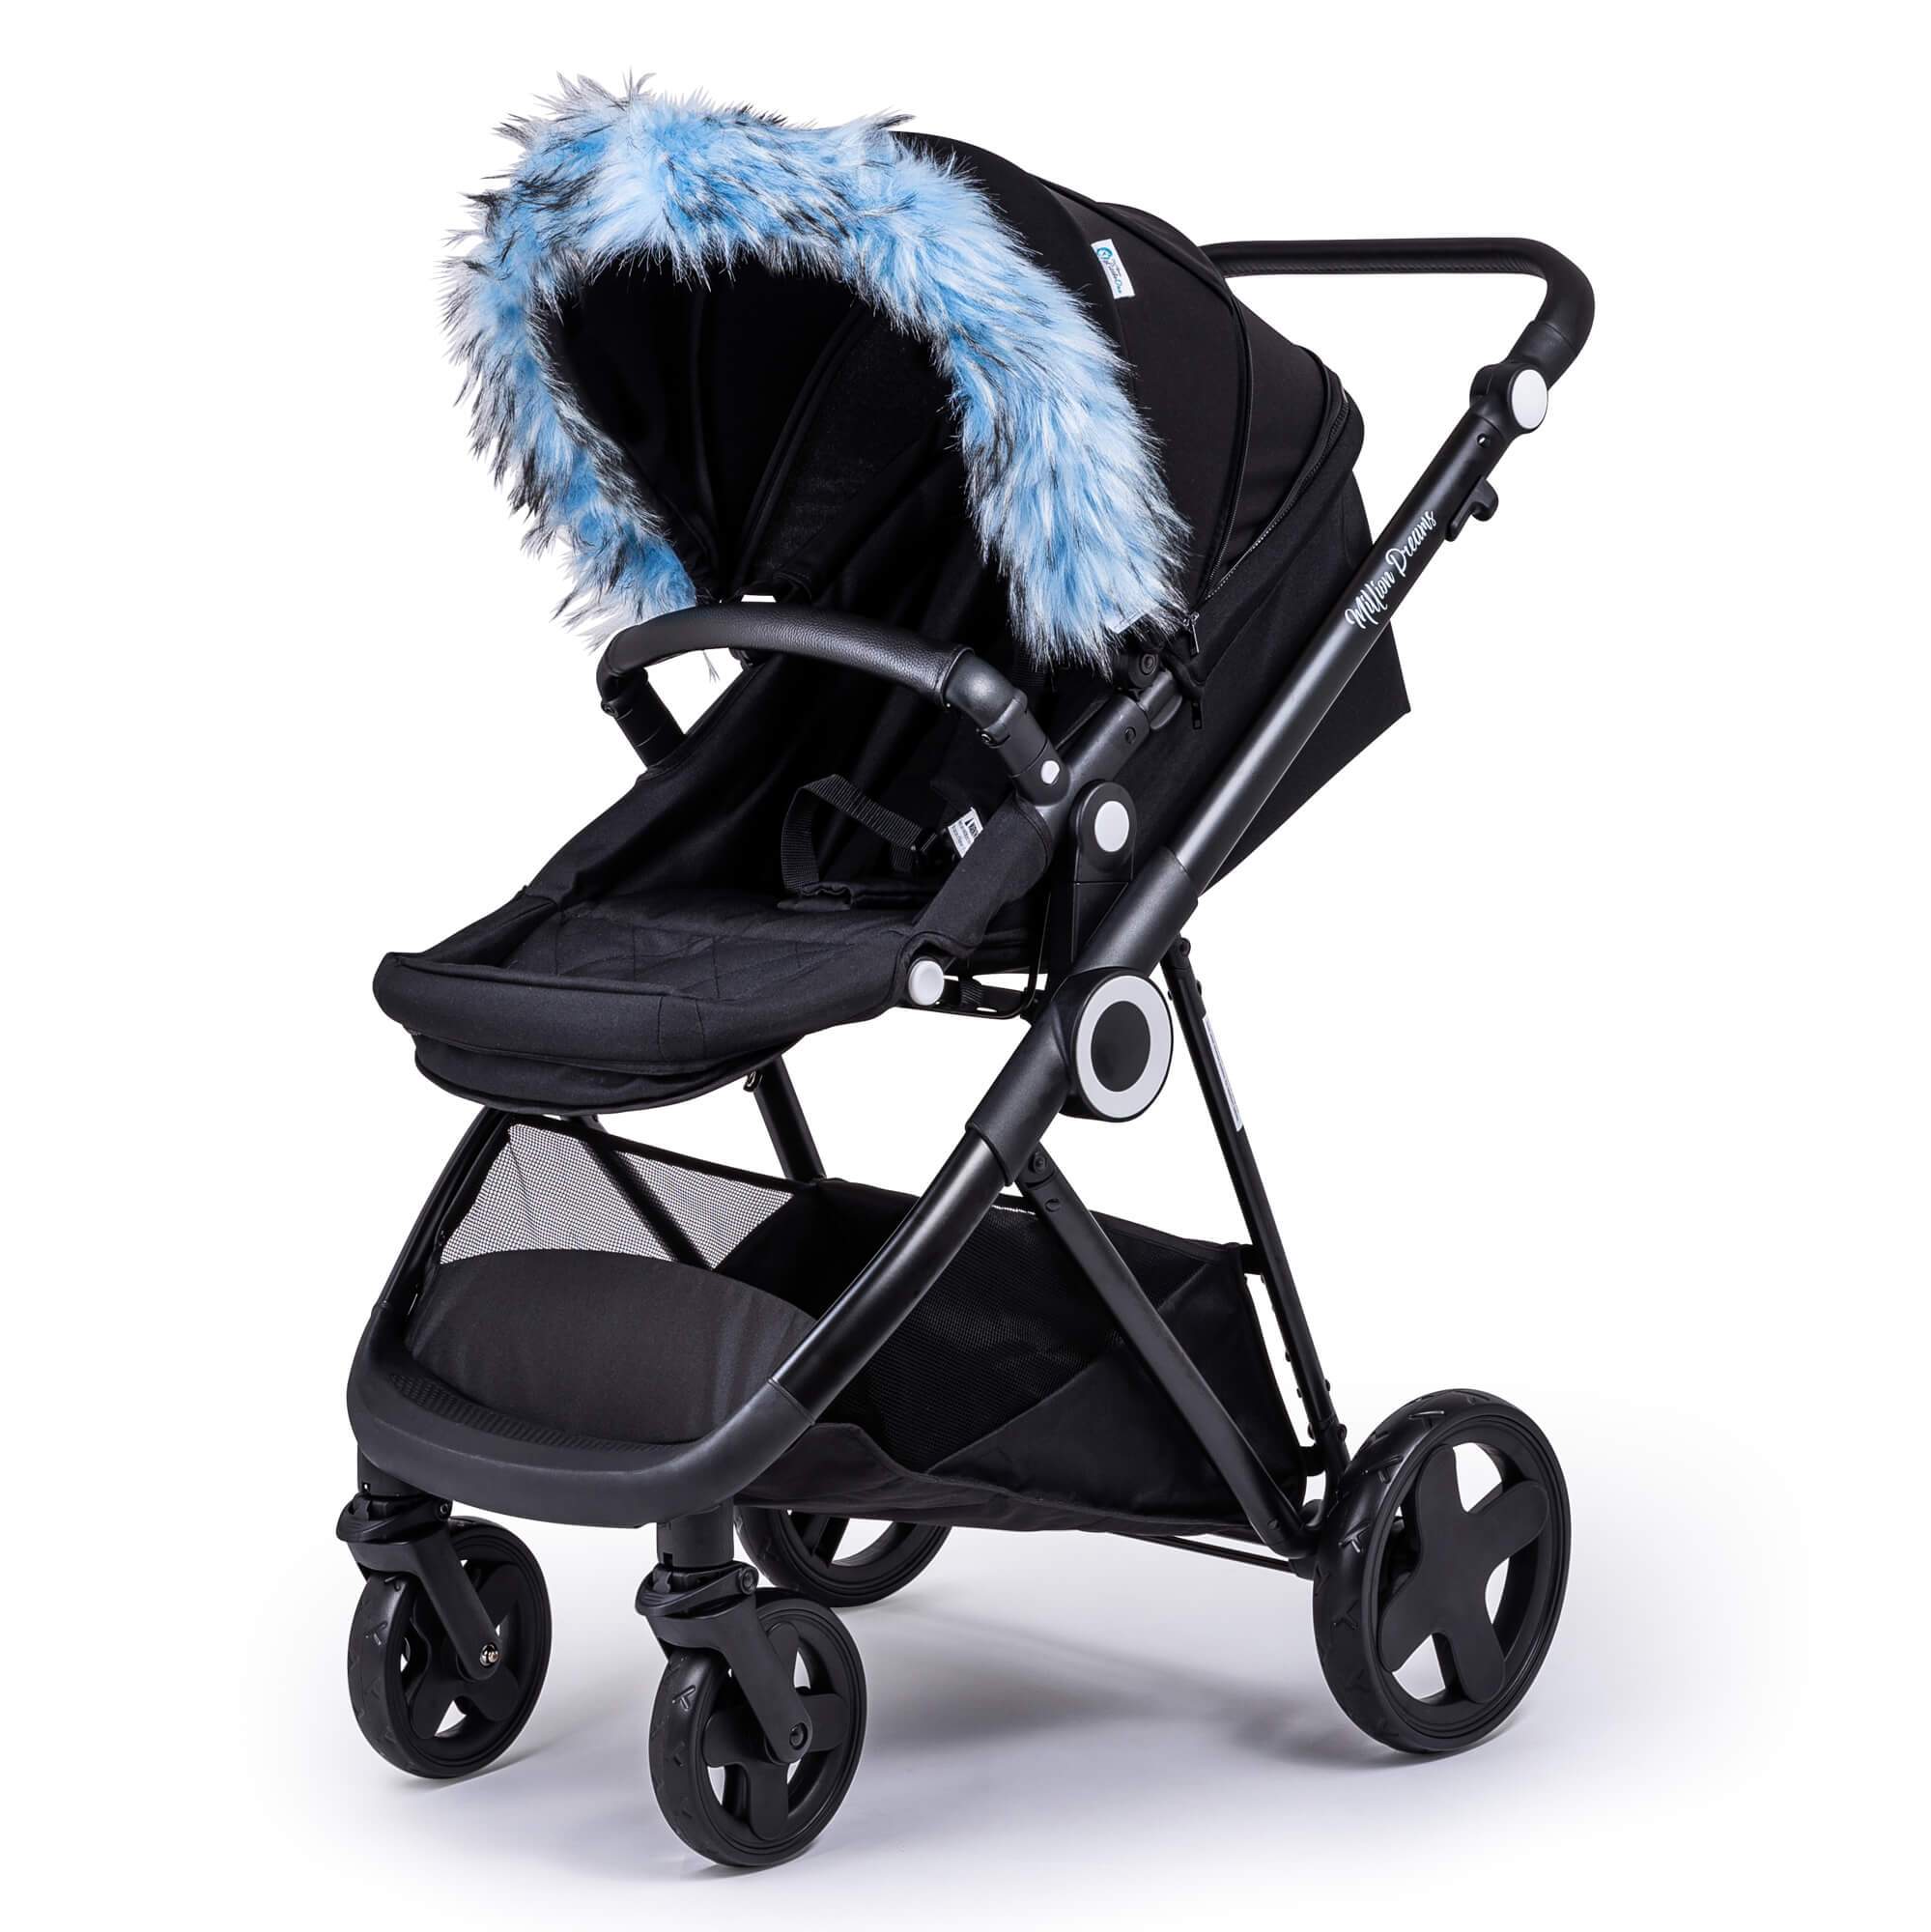 Pram Fur Hood Trim Attachment for Pushchair Compatible with Looping - Light Blue / Fits All Models | For Your Little One